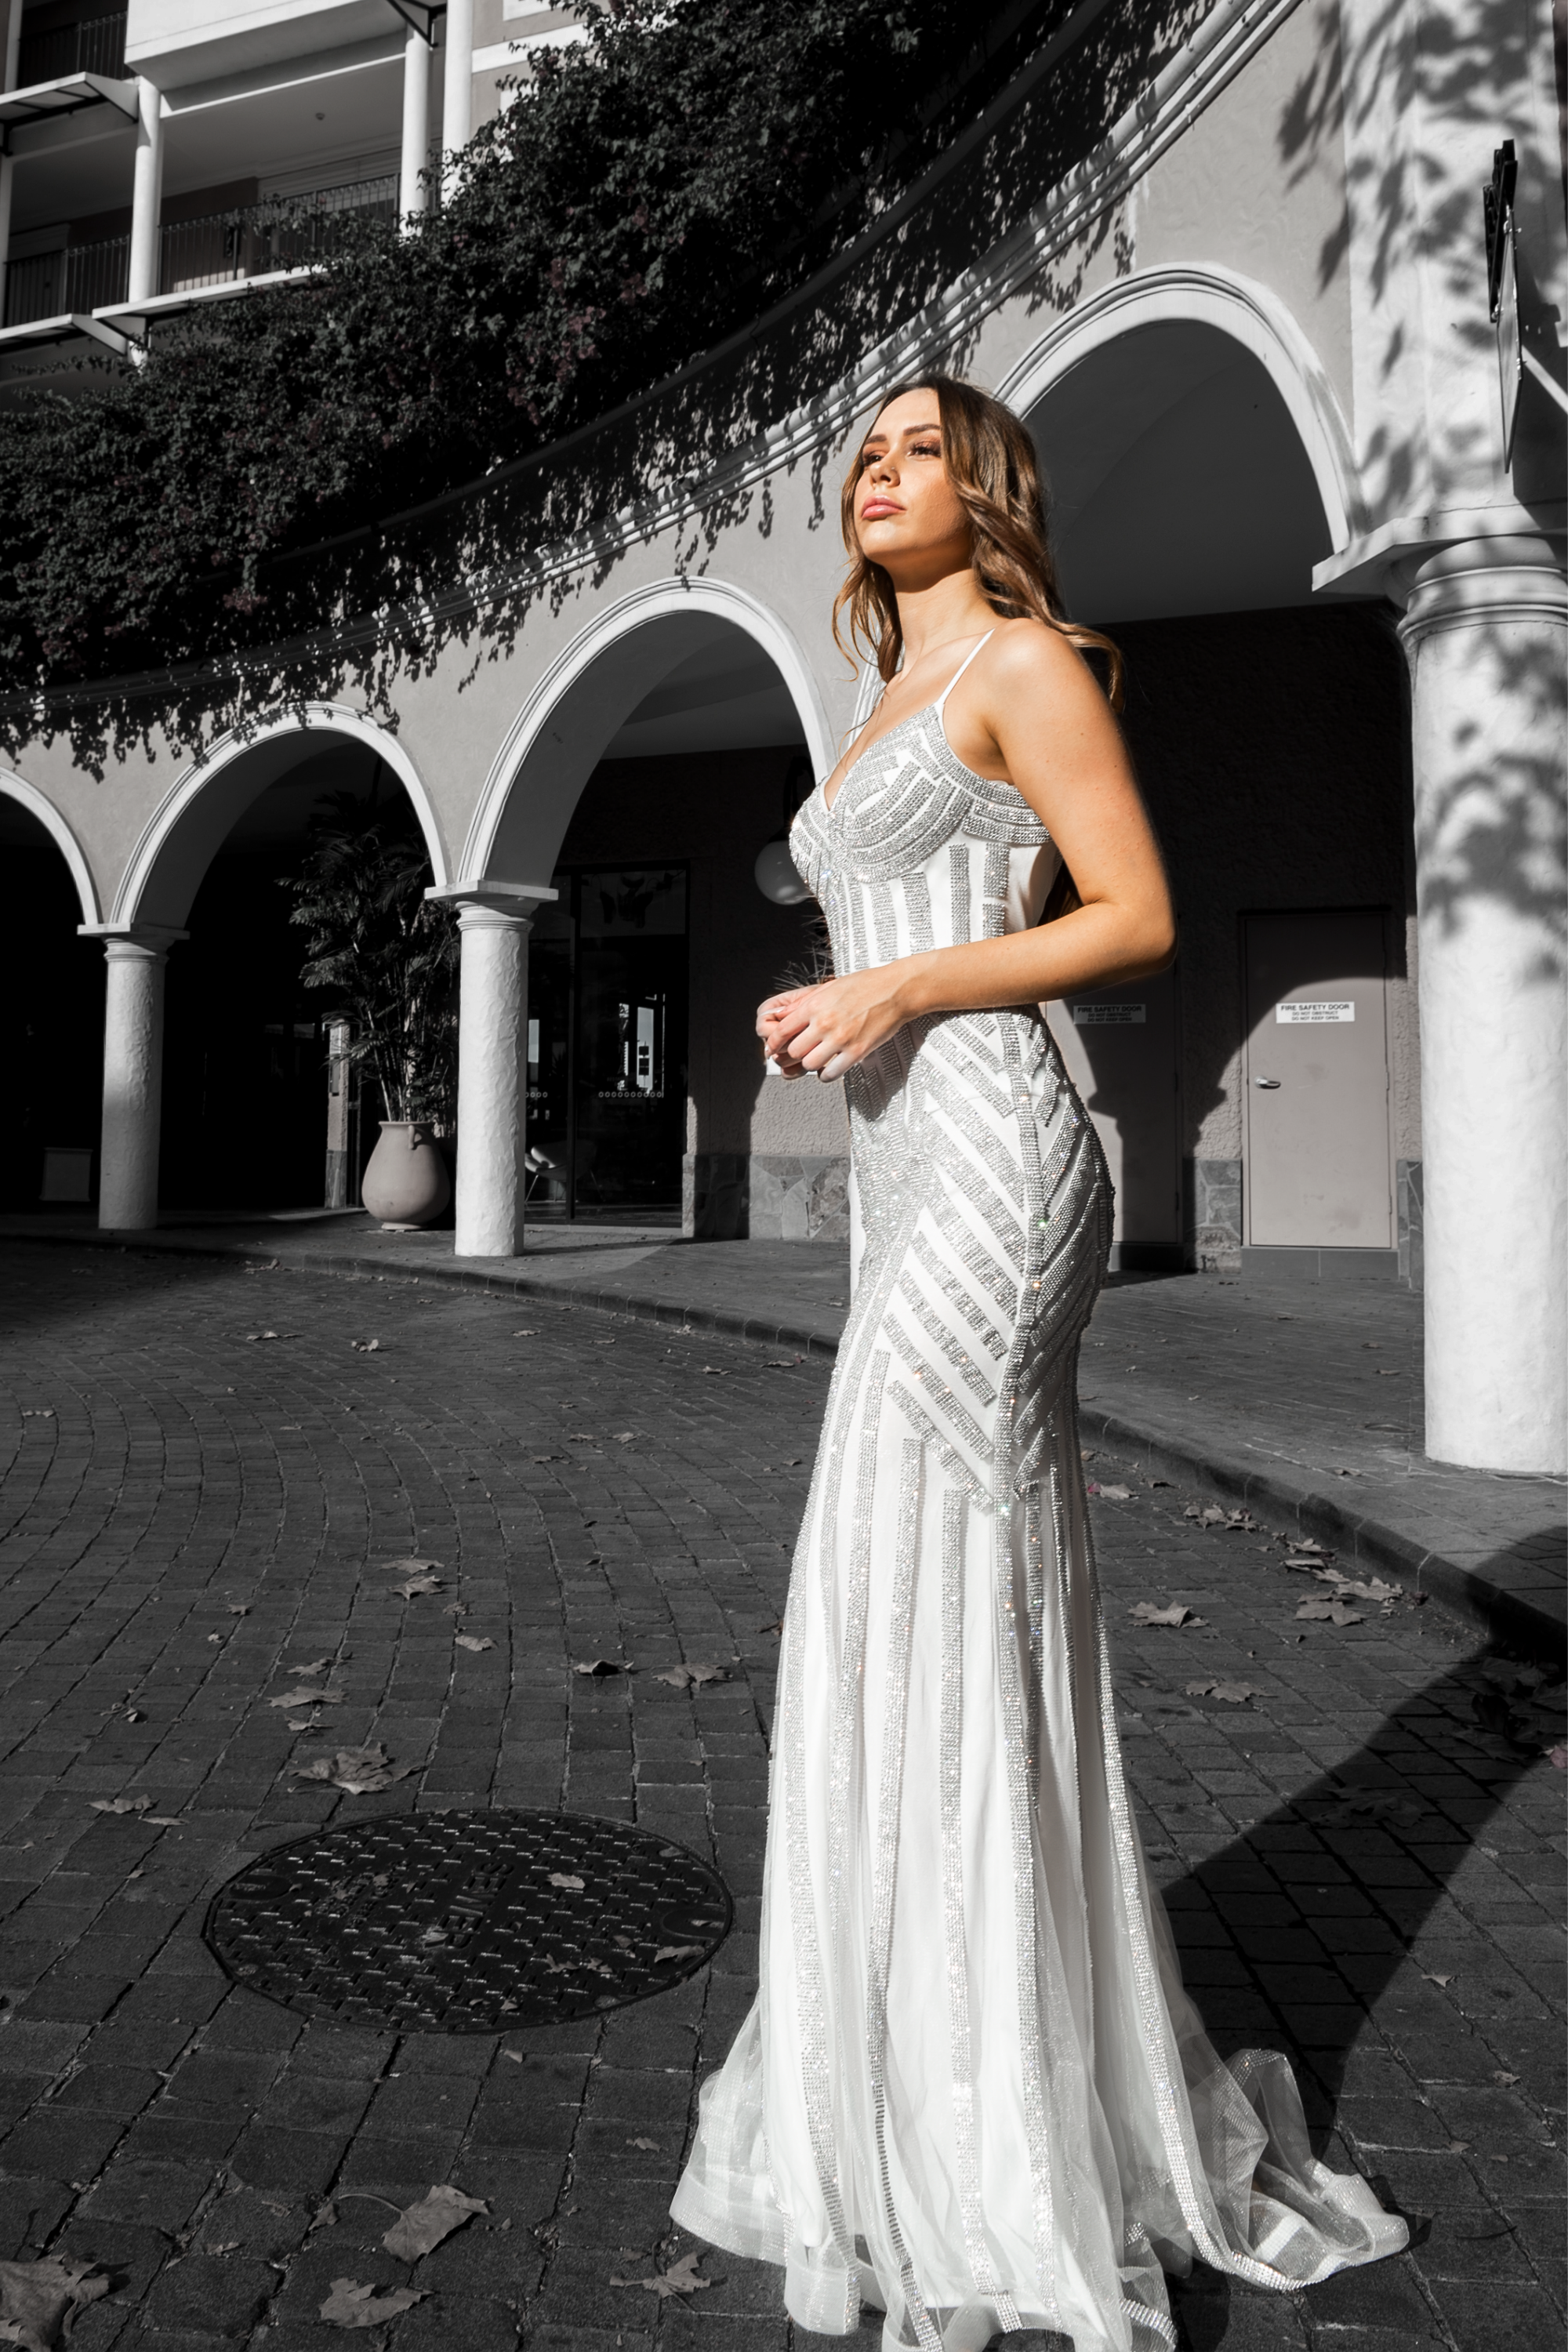 Honey Couture DIAMONDS White Sequin Mermaid Formal Wedding Gown Dress Private Label$ AfterPay Humm ZipPay LayBuy Sezzle